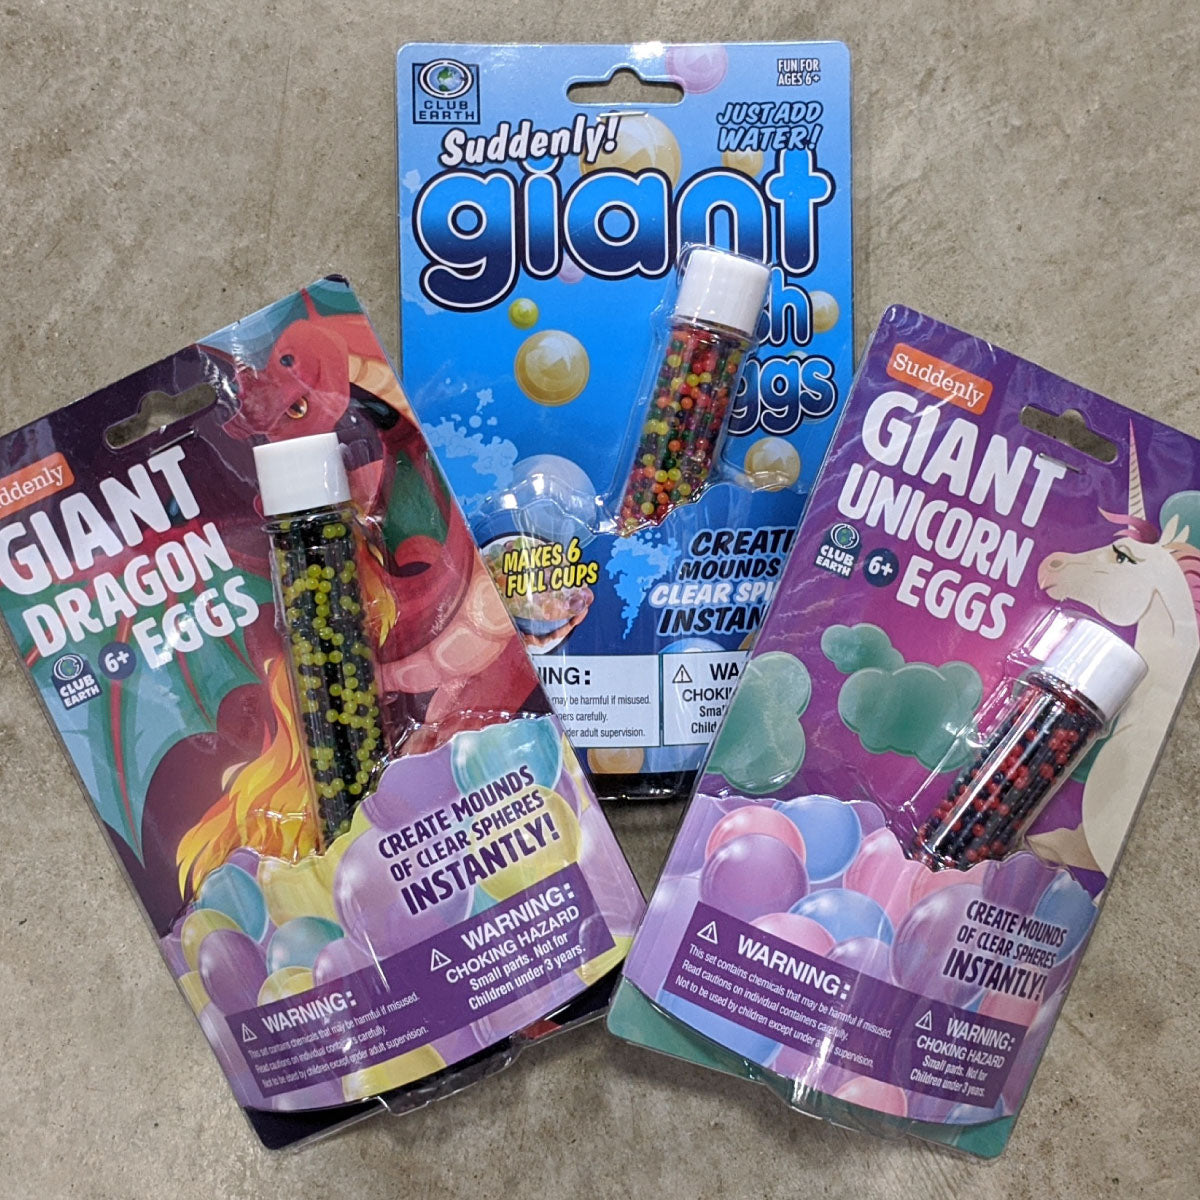 Suddenly Giant Eggs - Just Add Water! From Play Vision